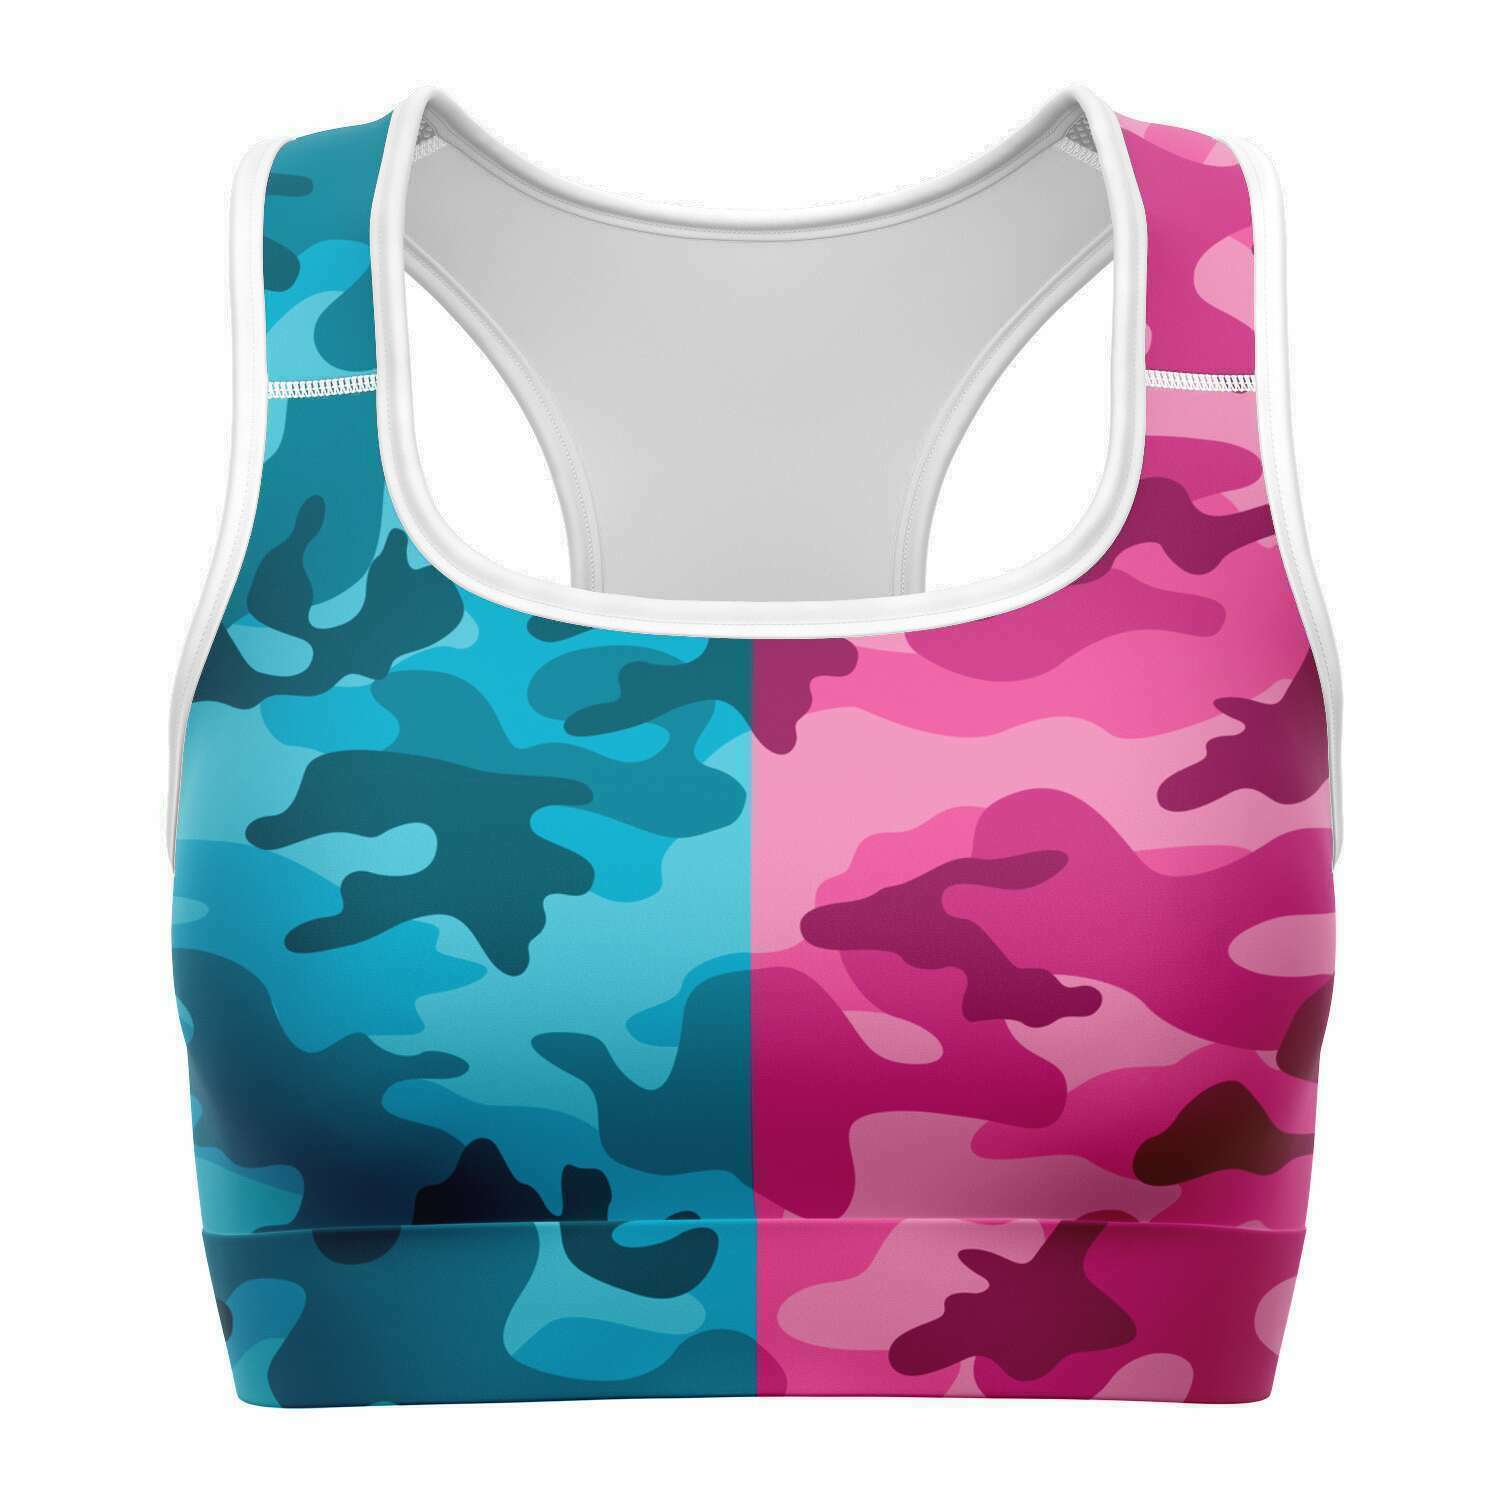 Women's All Cyan Pink Camouflage Athletic Sports Bra